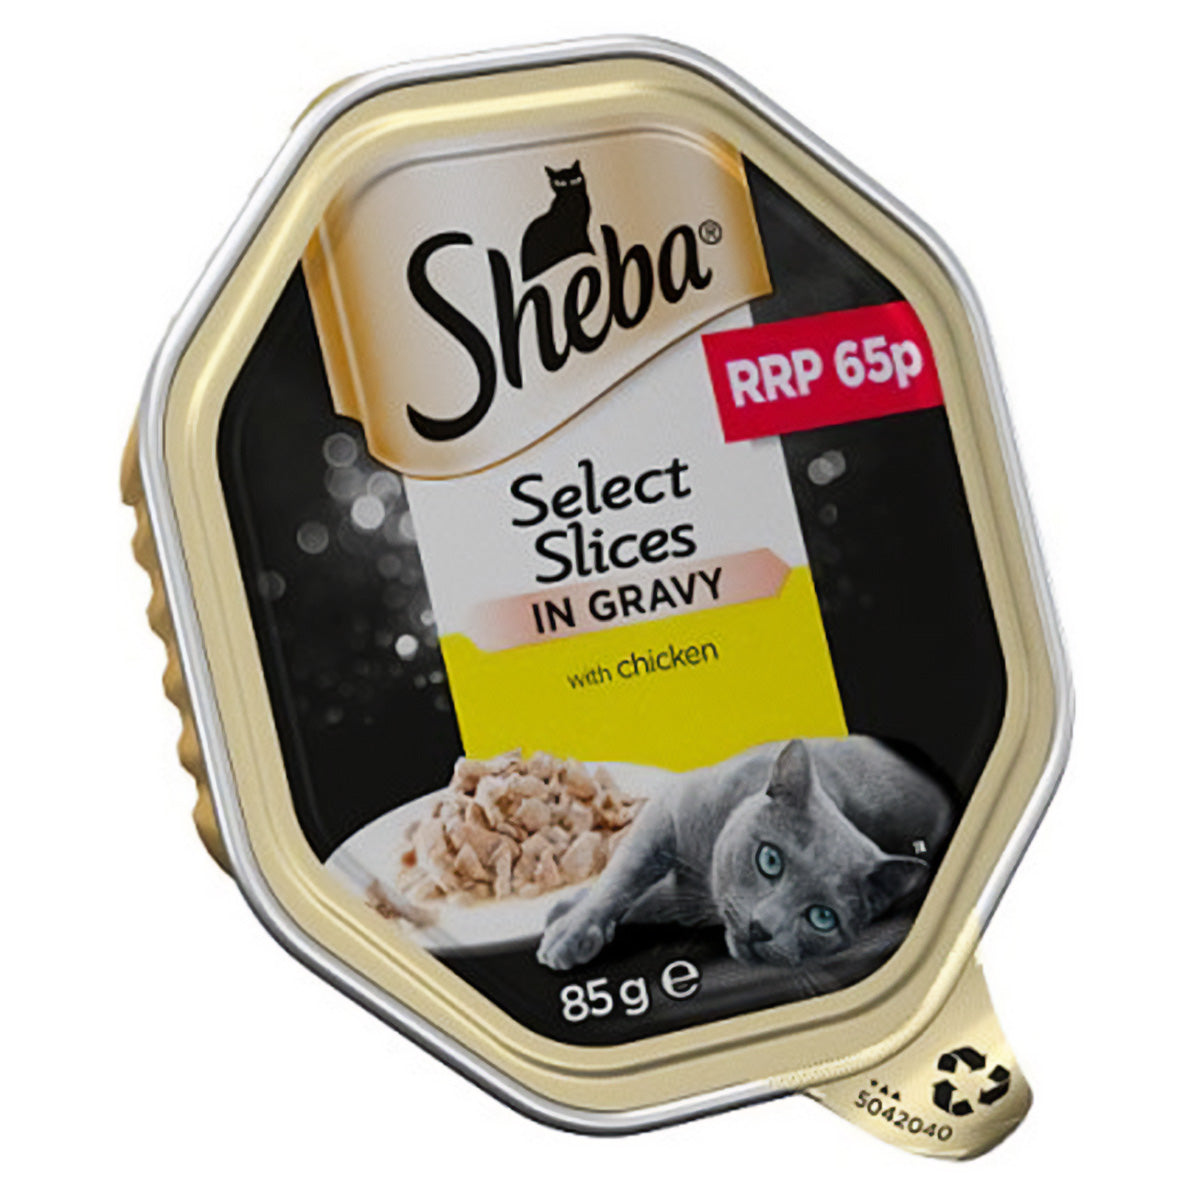 Sheba select slices in grey should be replaced with Sheba - Select Slices Chicken in Gravy Wet Cat Food Tray - 85g by Sheba.